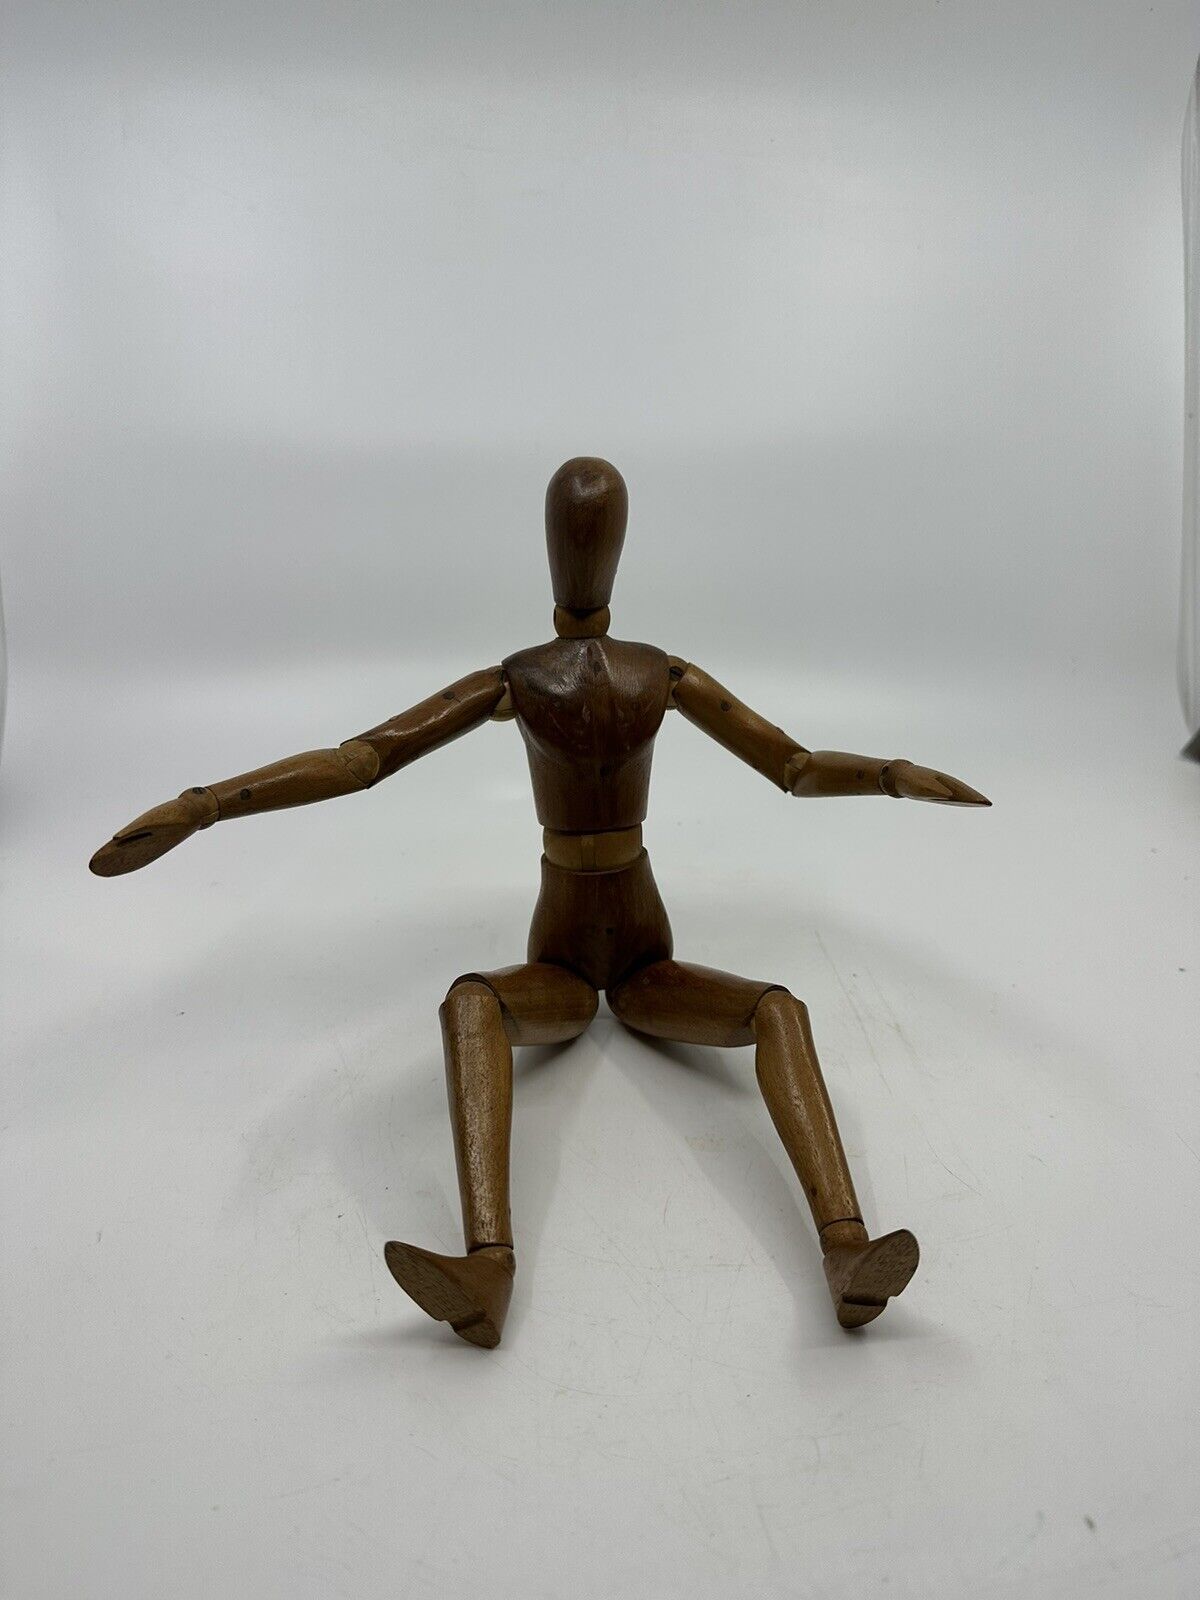 Articulated Studio Mannequin Early 20th Century Rare Find Really Cool.